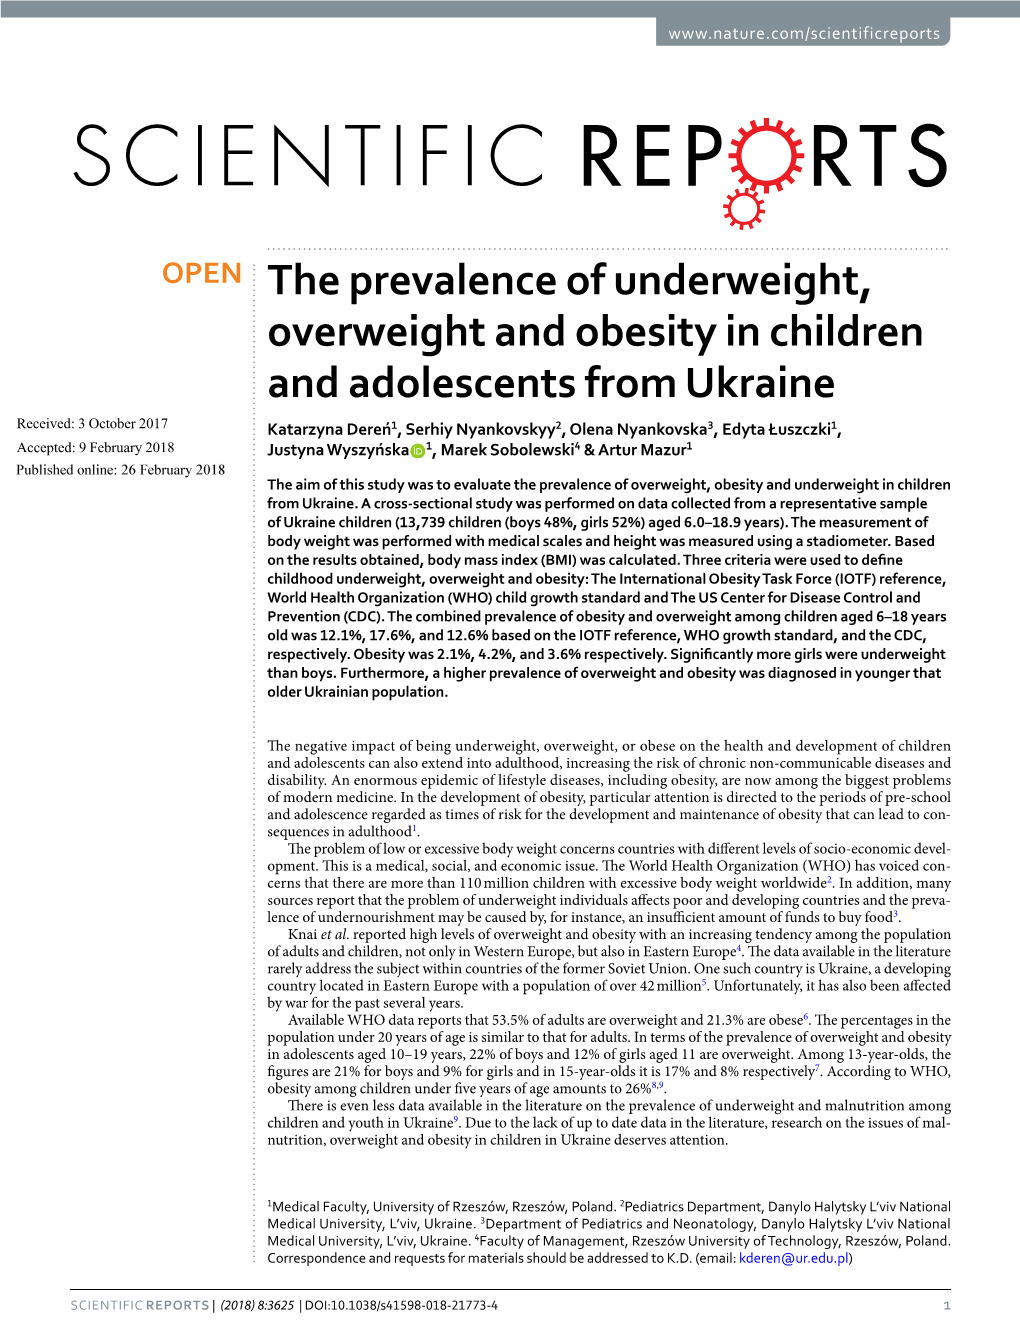 The Prevalence of Underweight, Overweight and Obesity in Children